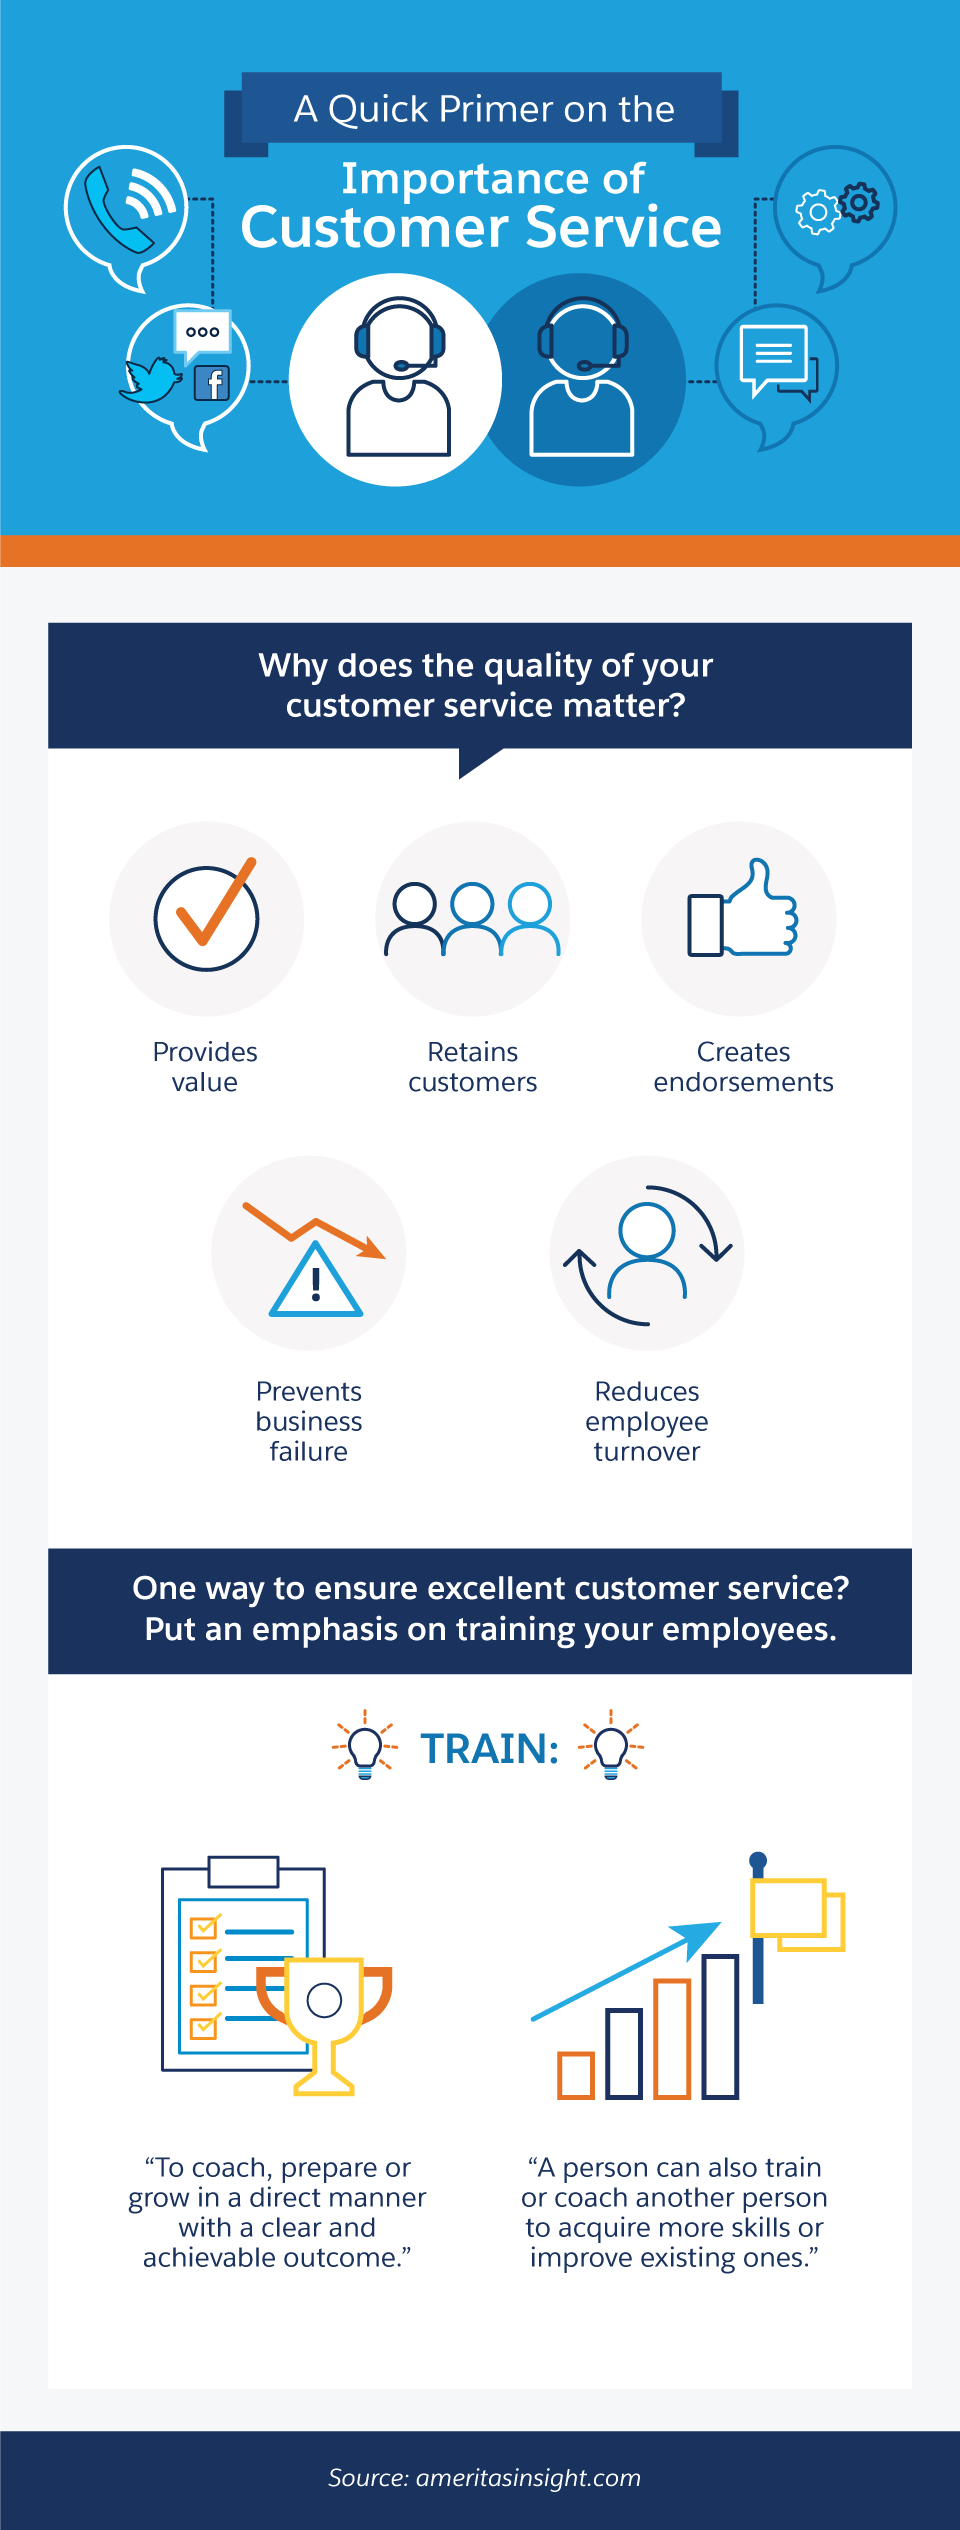 9 Customer Service Training Ideas You Can Try Right Now - Salesforce